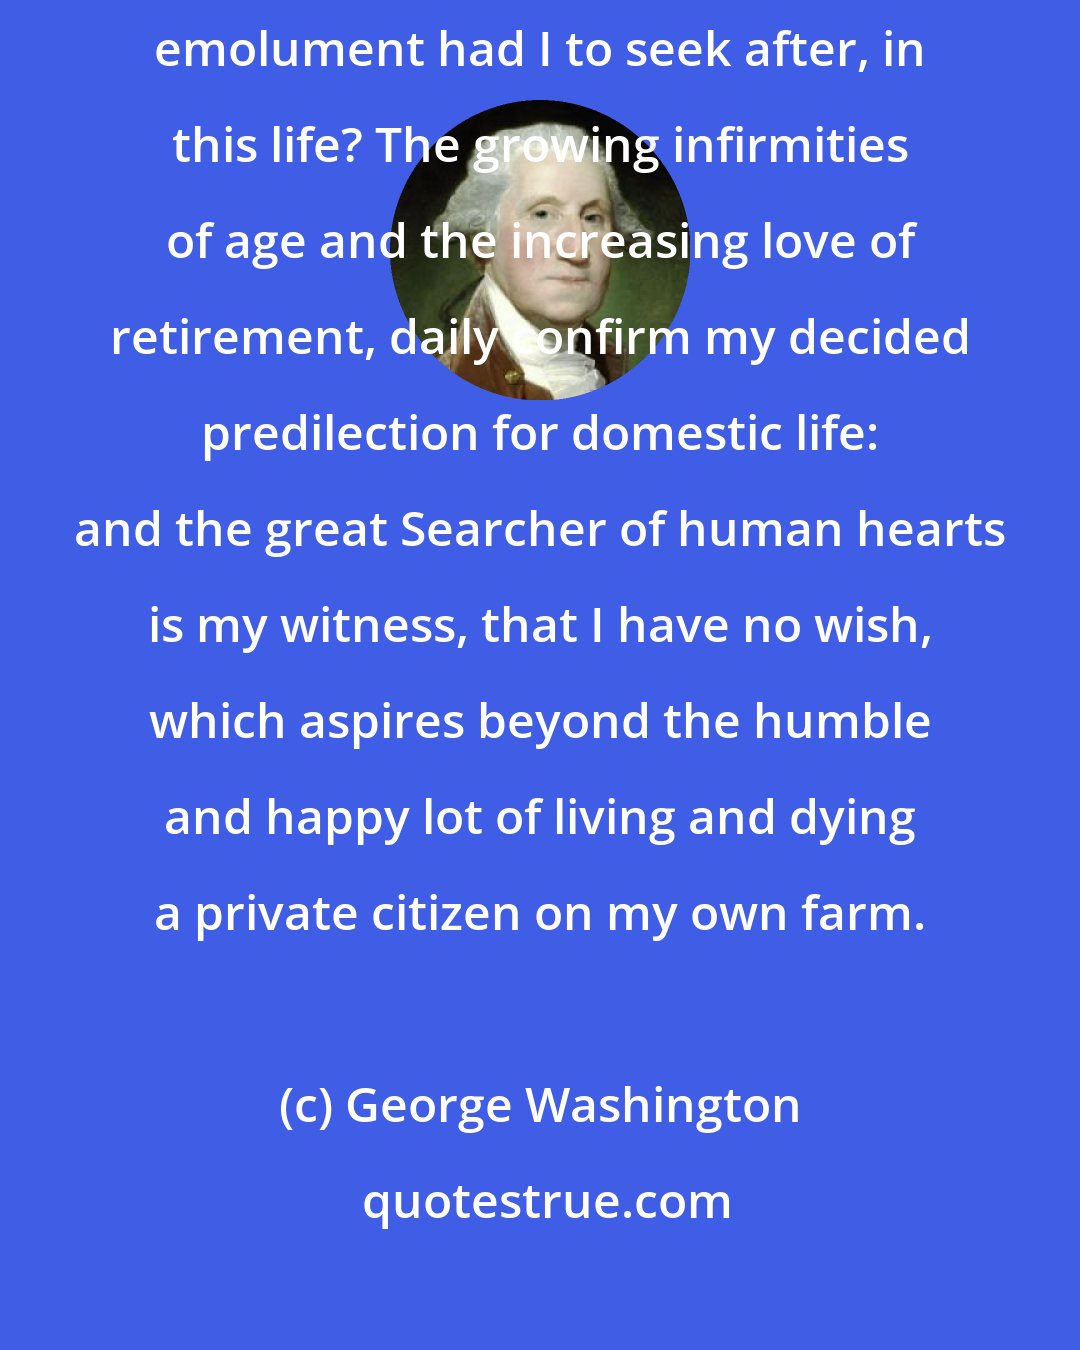 George Washington: At my age, and in my circumstances, what sinister object, or personal emolument had I to seek after, in this life? The growing infirmities of age and the increasing love of retirement, daily confirm my decided predilection for domestic life: and the great Searcher of human hearts is my witness, that I have no wish, which aspires beyond the humble and happy lot of living and dying a private citizen on my own farm.